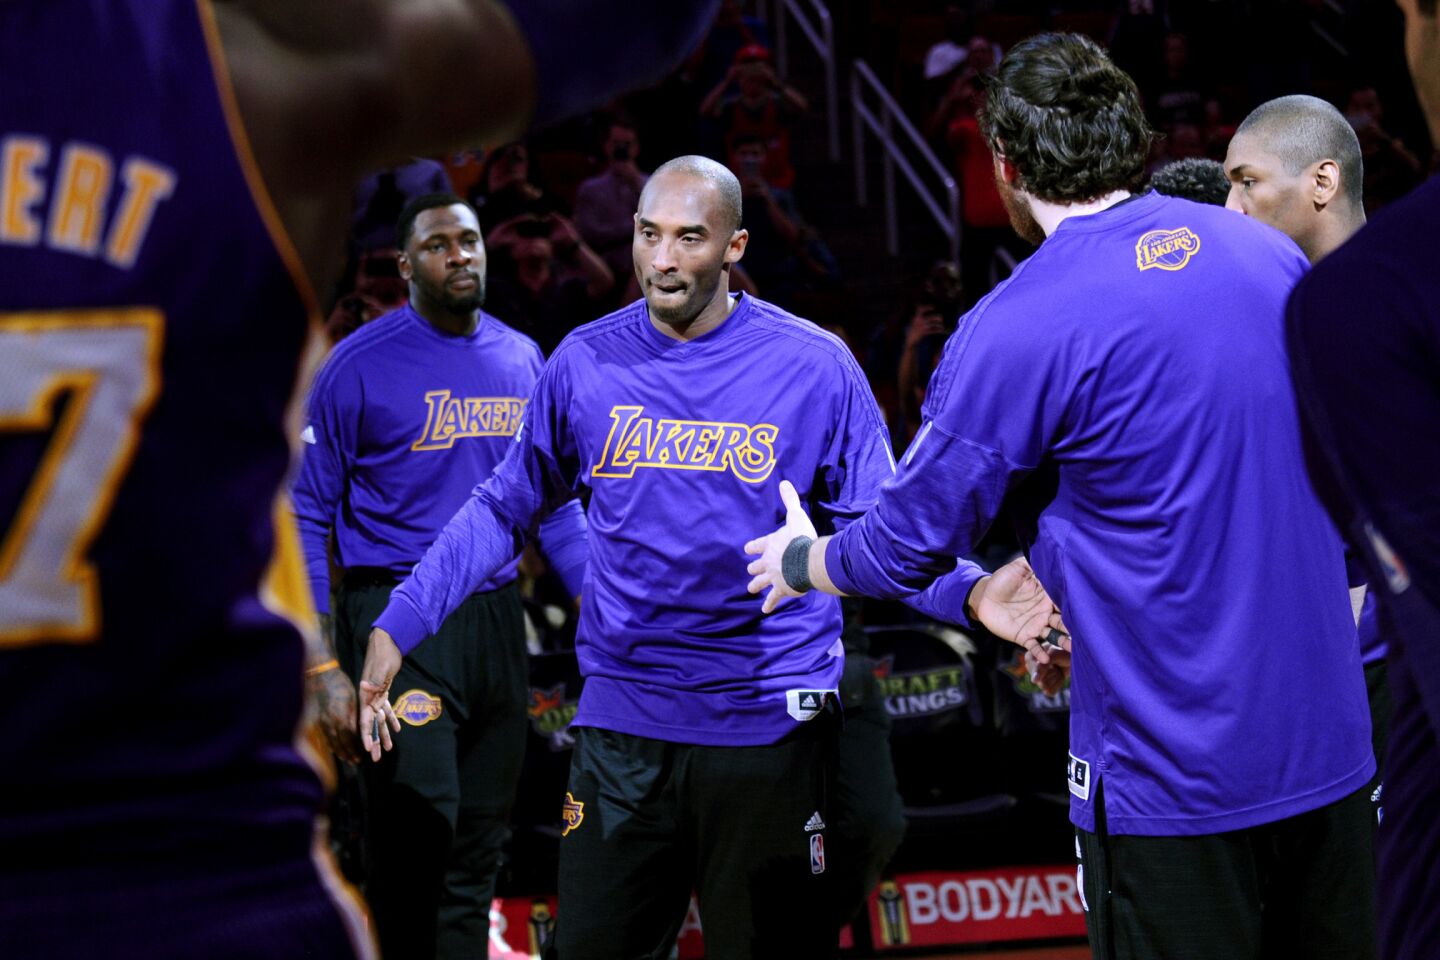 Lakers star Kobe Bryant is introduced for the last time before a game against the Rockets in Houston.